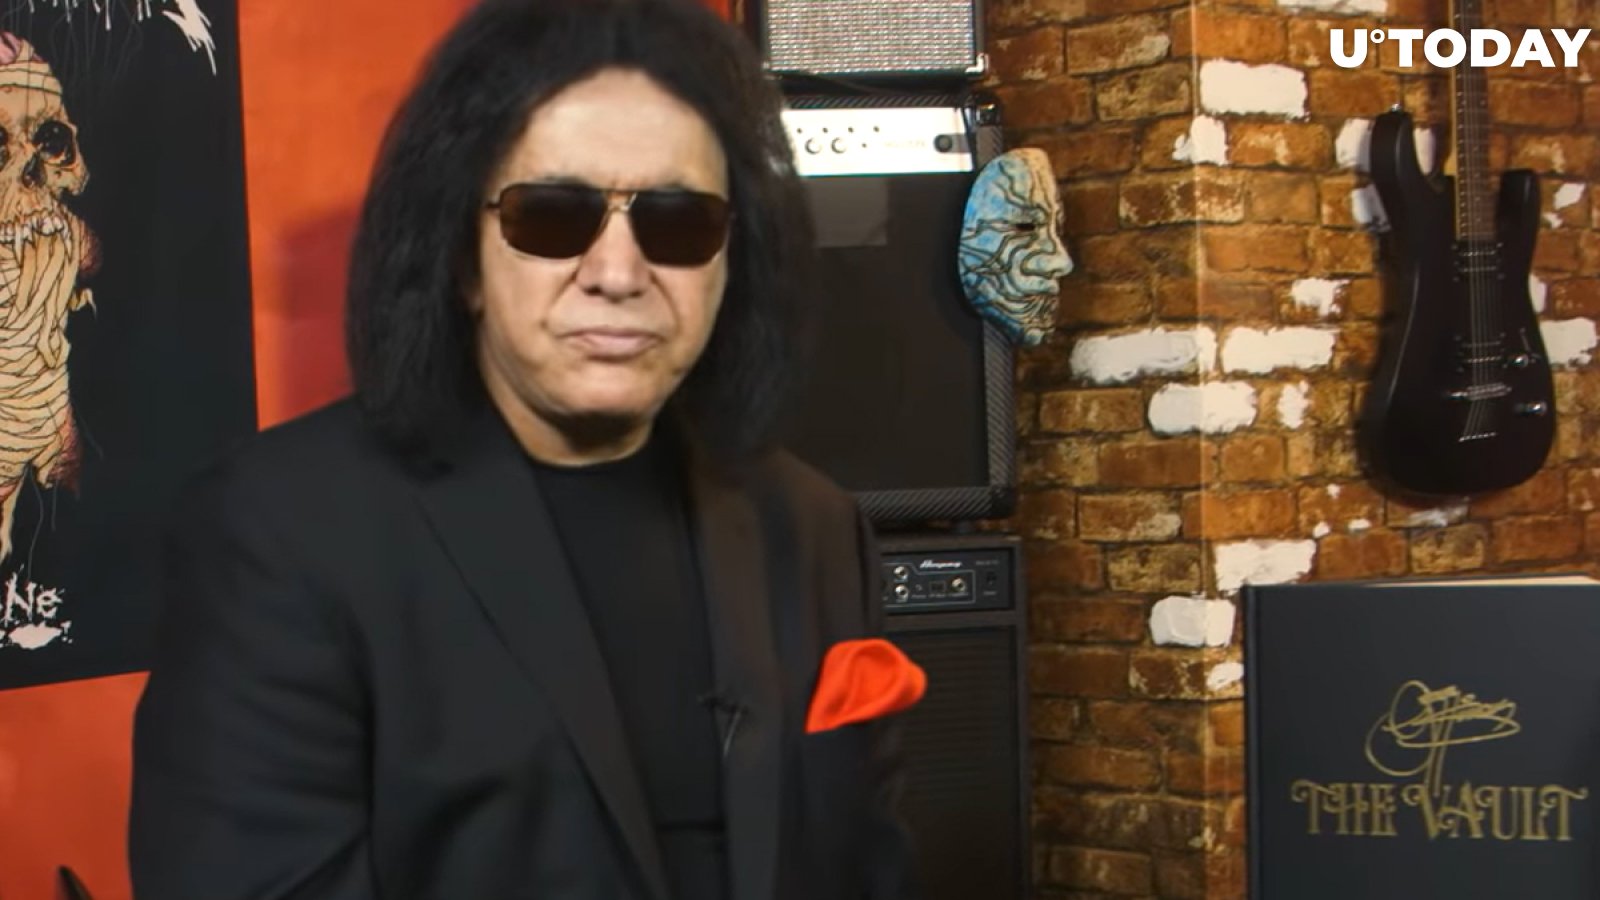 Rock Legend Gene Simmons Says He's "All In" on Bitcoin